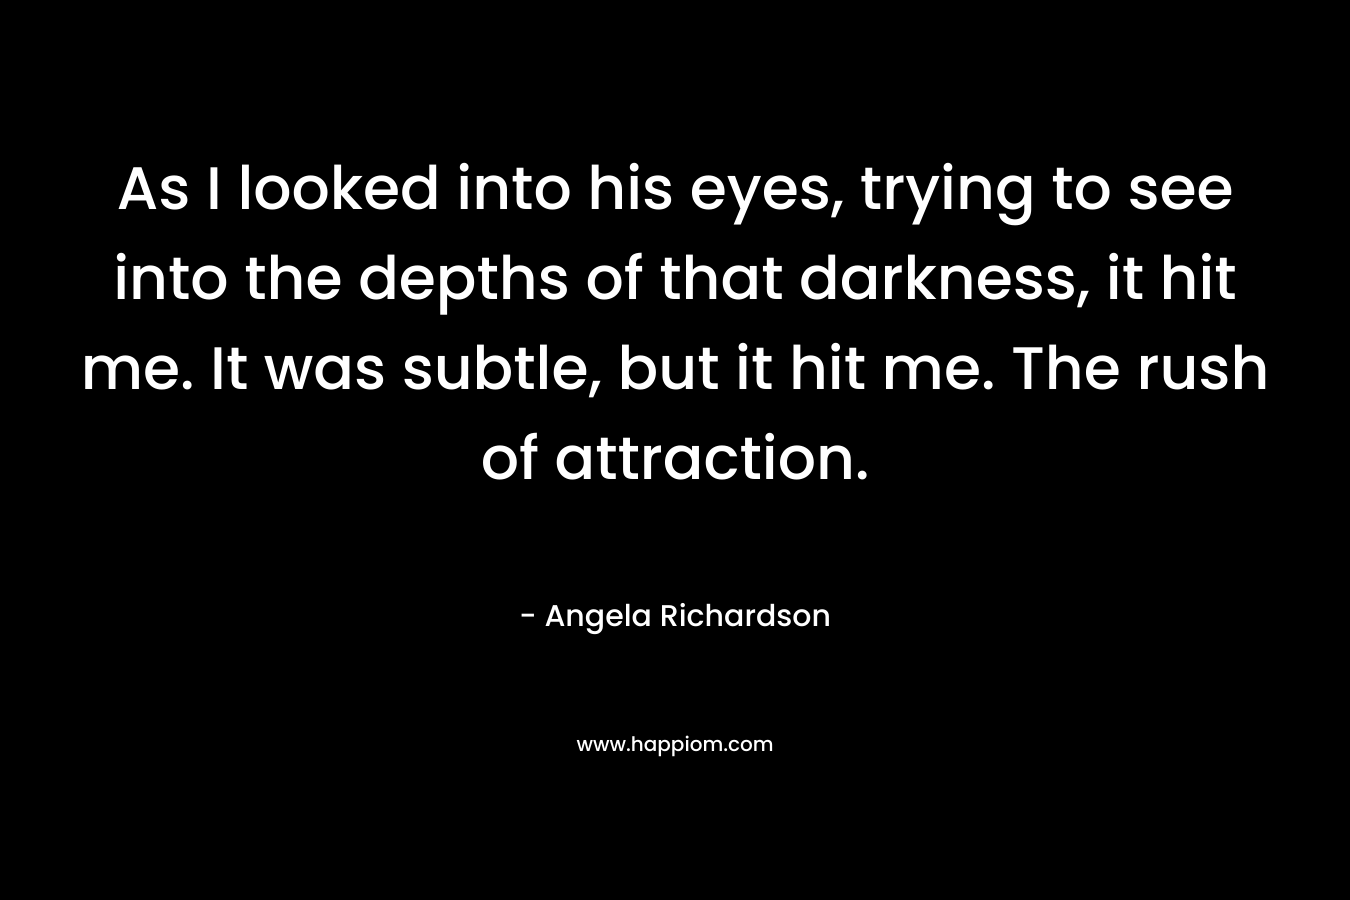 As I looked into his eyes, trying to see into the depths of that darkness, it hit me. It was subtle, but it hit me. The rush of attraction.